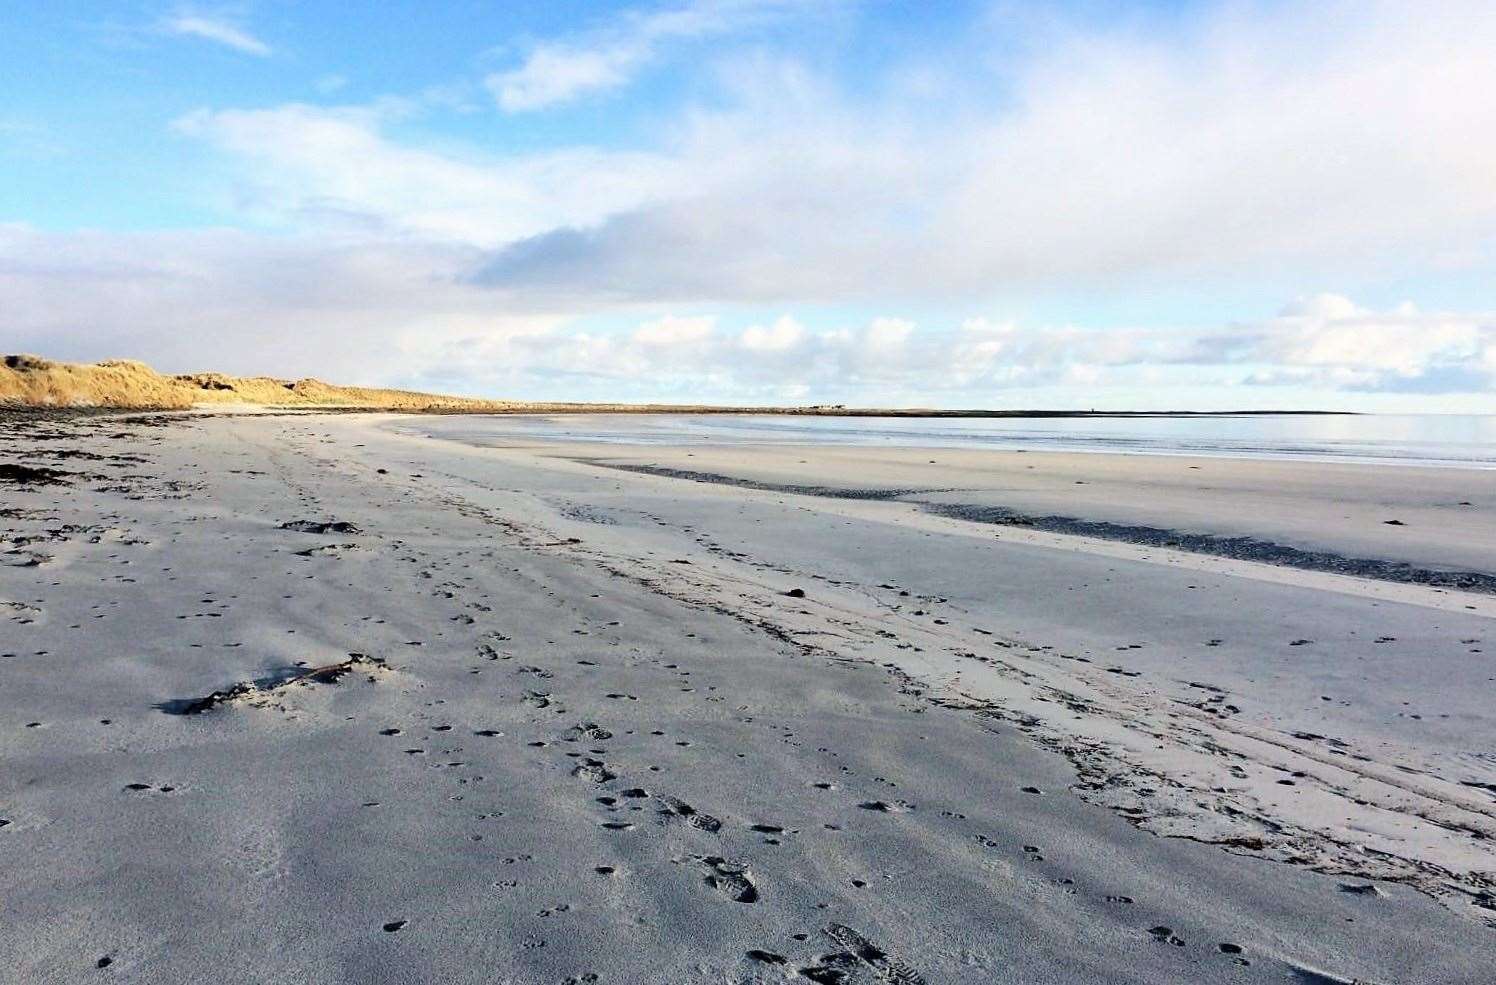 Johanna Gilbert was walking her dog on Stywick beach on the Orkney island of Sanday when she came across the small plastic bottle.